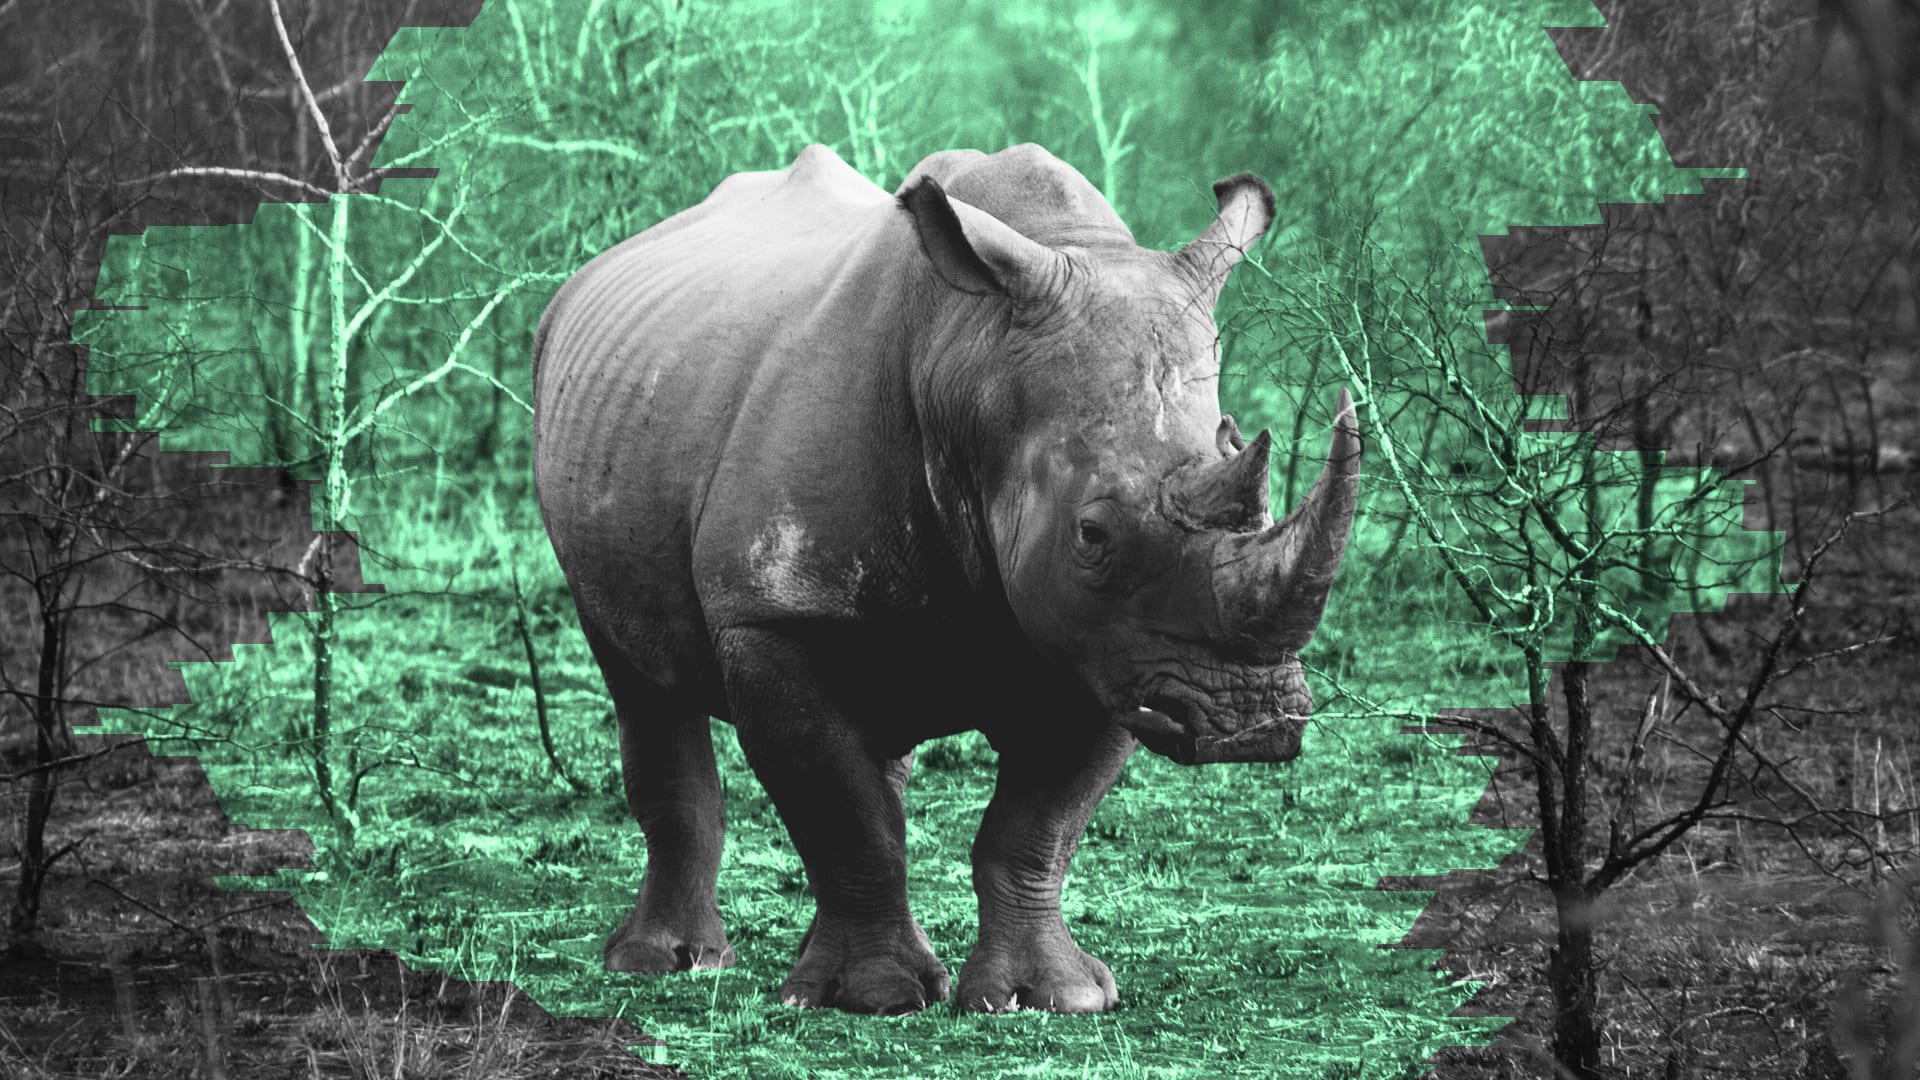 Endangered rhinos are now being protected by powerful data analytics